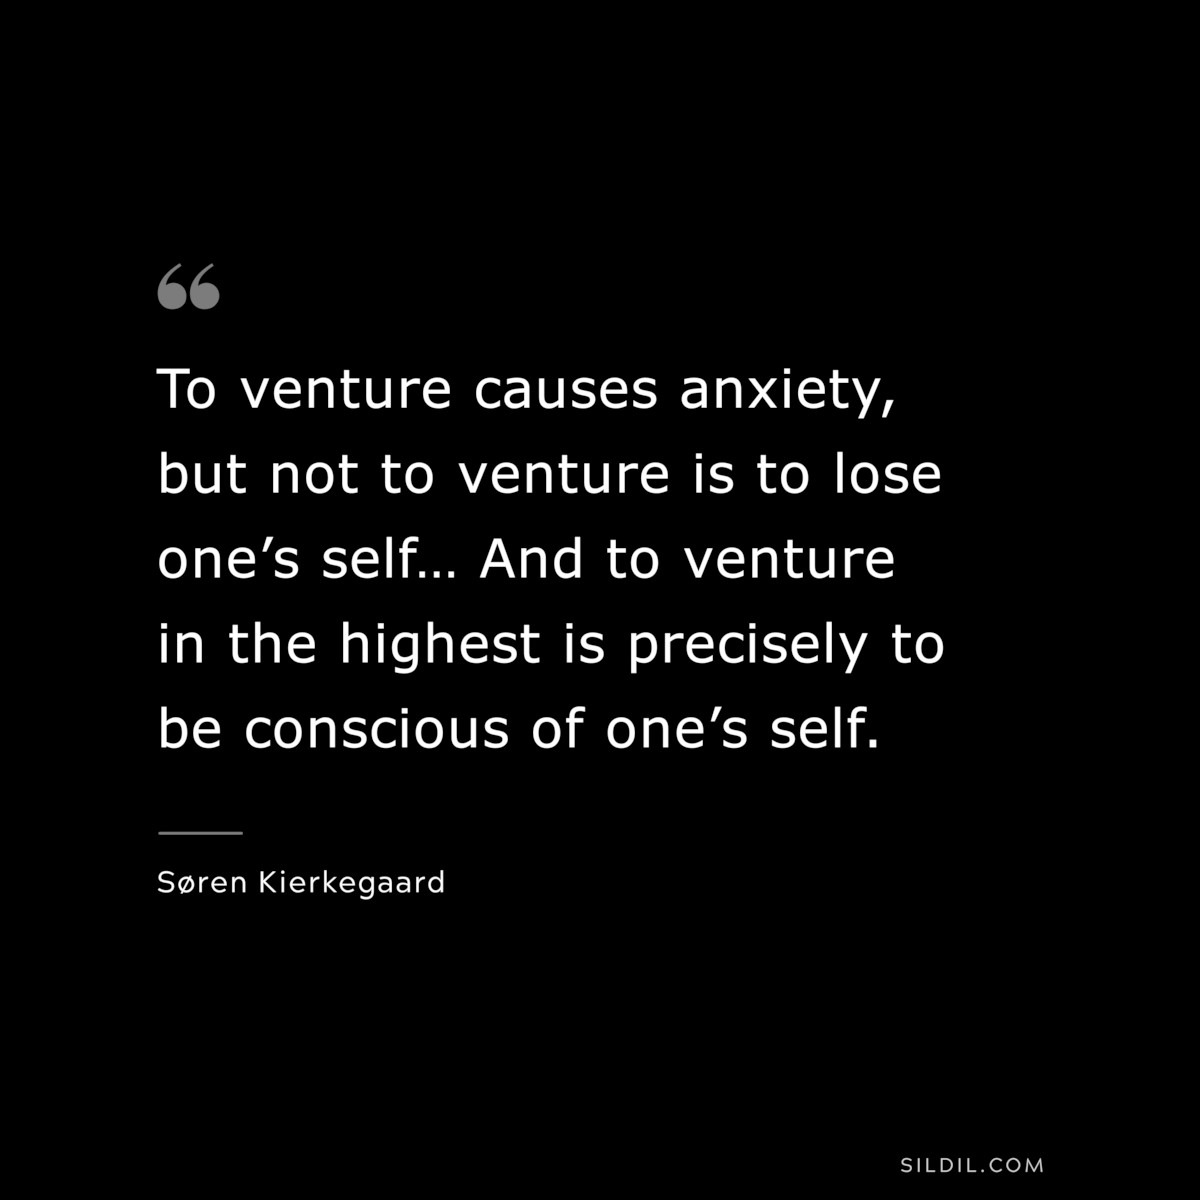 To venture causes anxiety, but not to venture is to lose one’s self… And to venture in the highest is precisely to be conscious of one’s self. ― Søren Kierkegaard